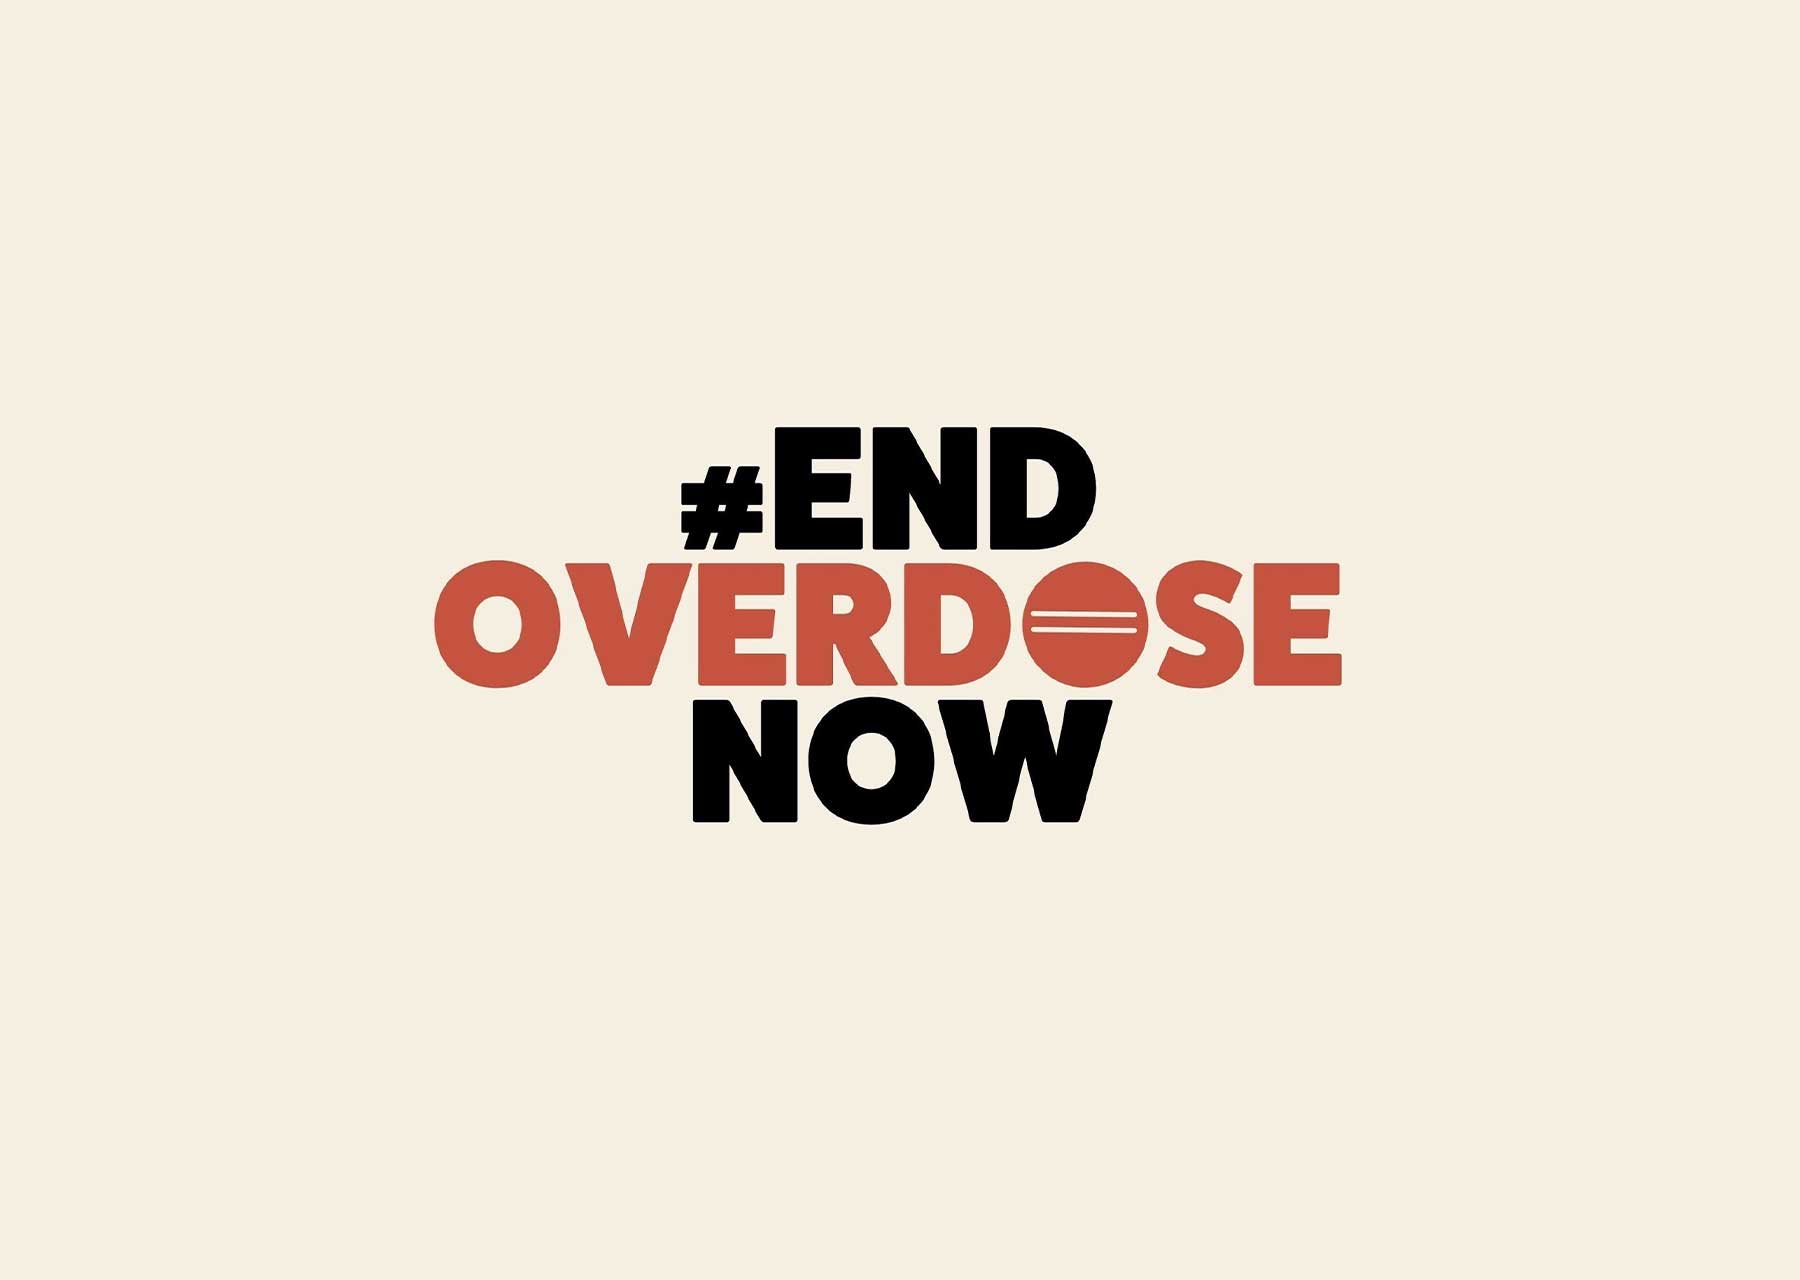 End Overdose Now Letter Campaign